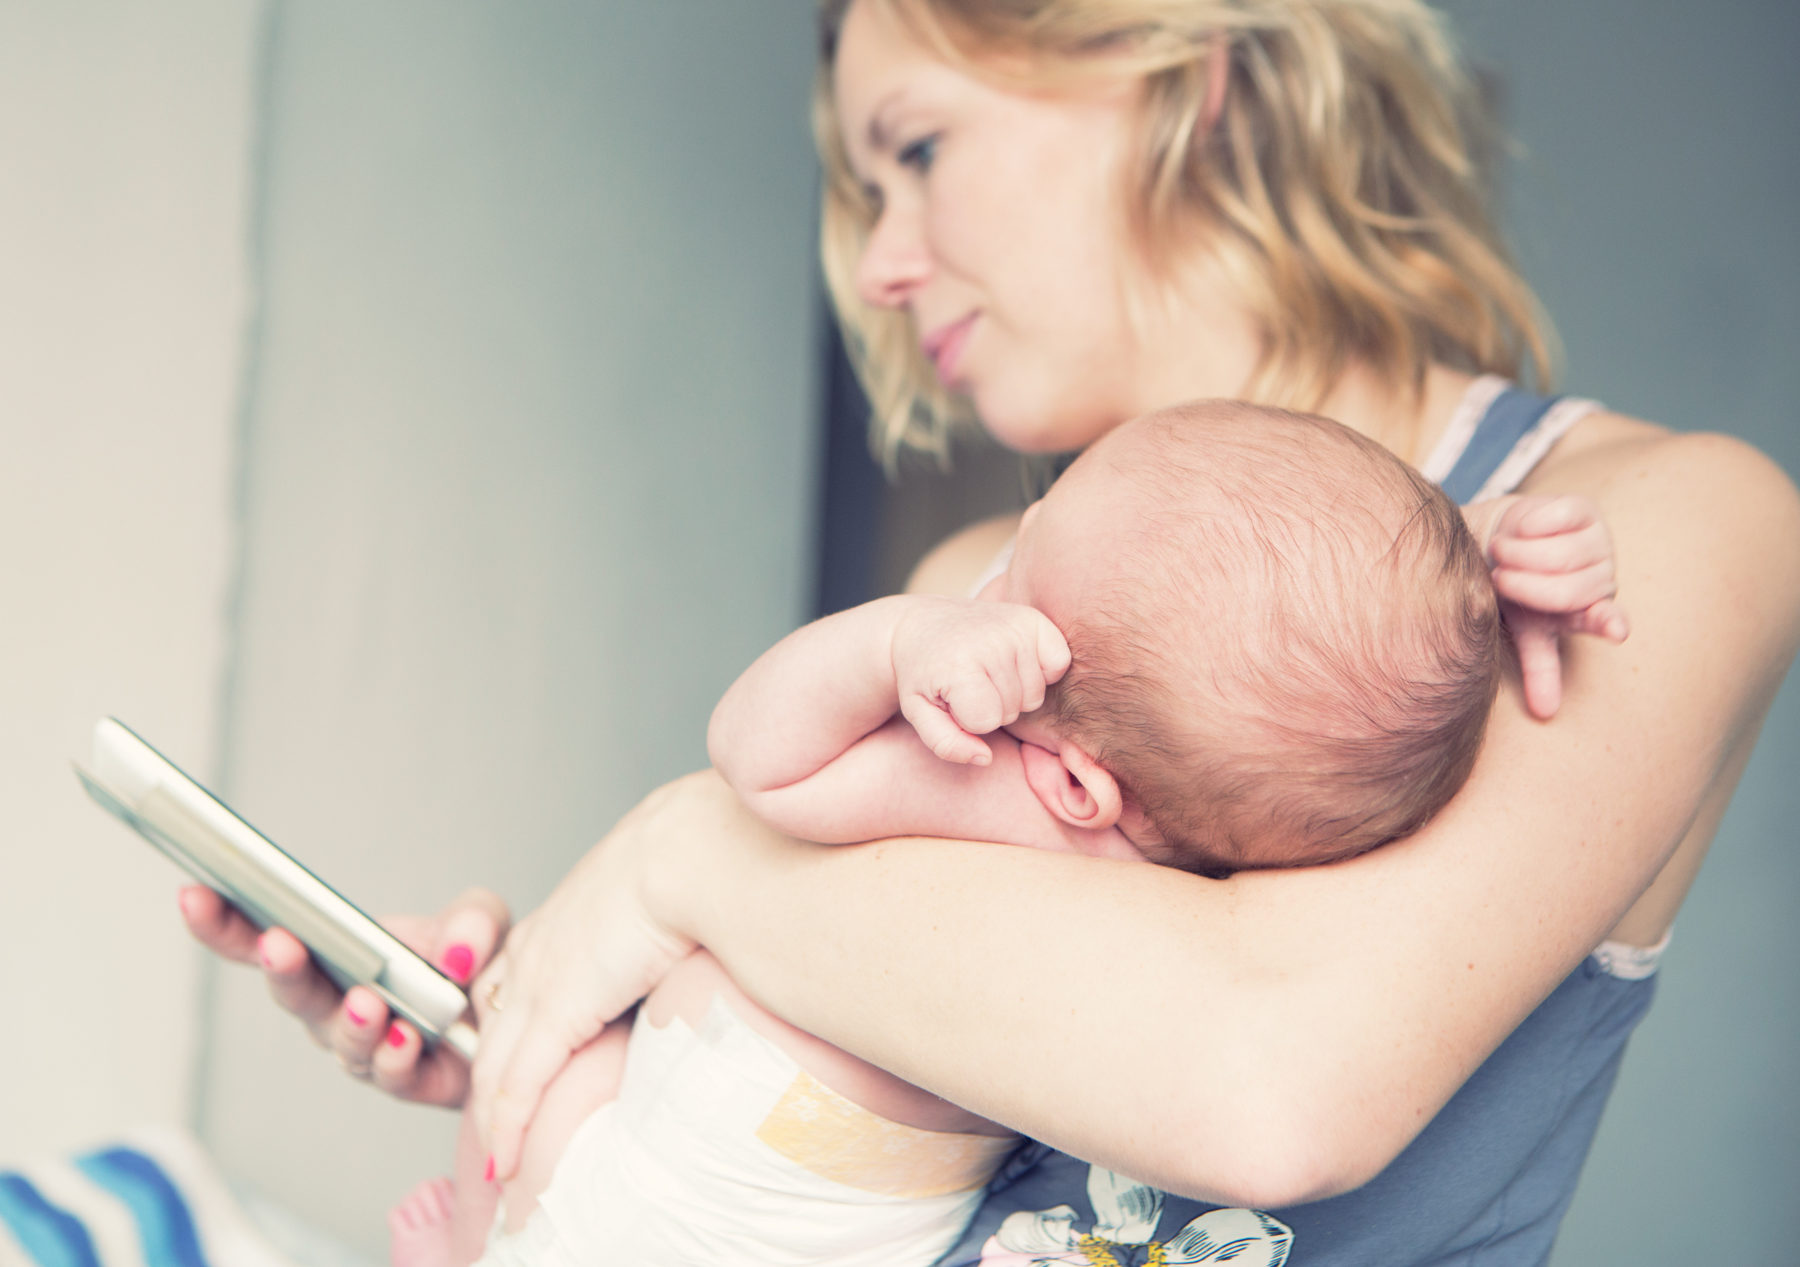 There are apps for everything--even apps for breastfeeding.